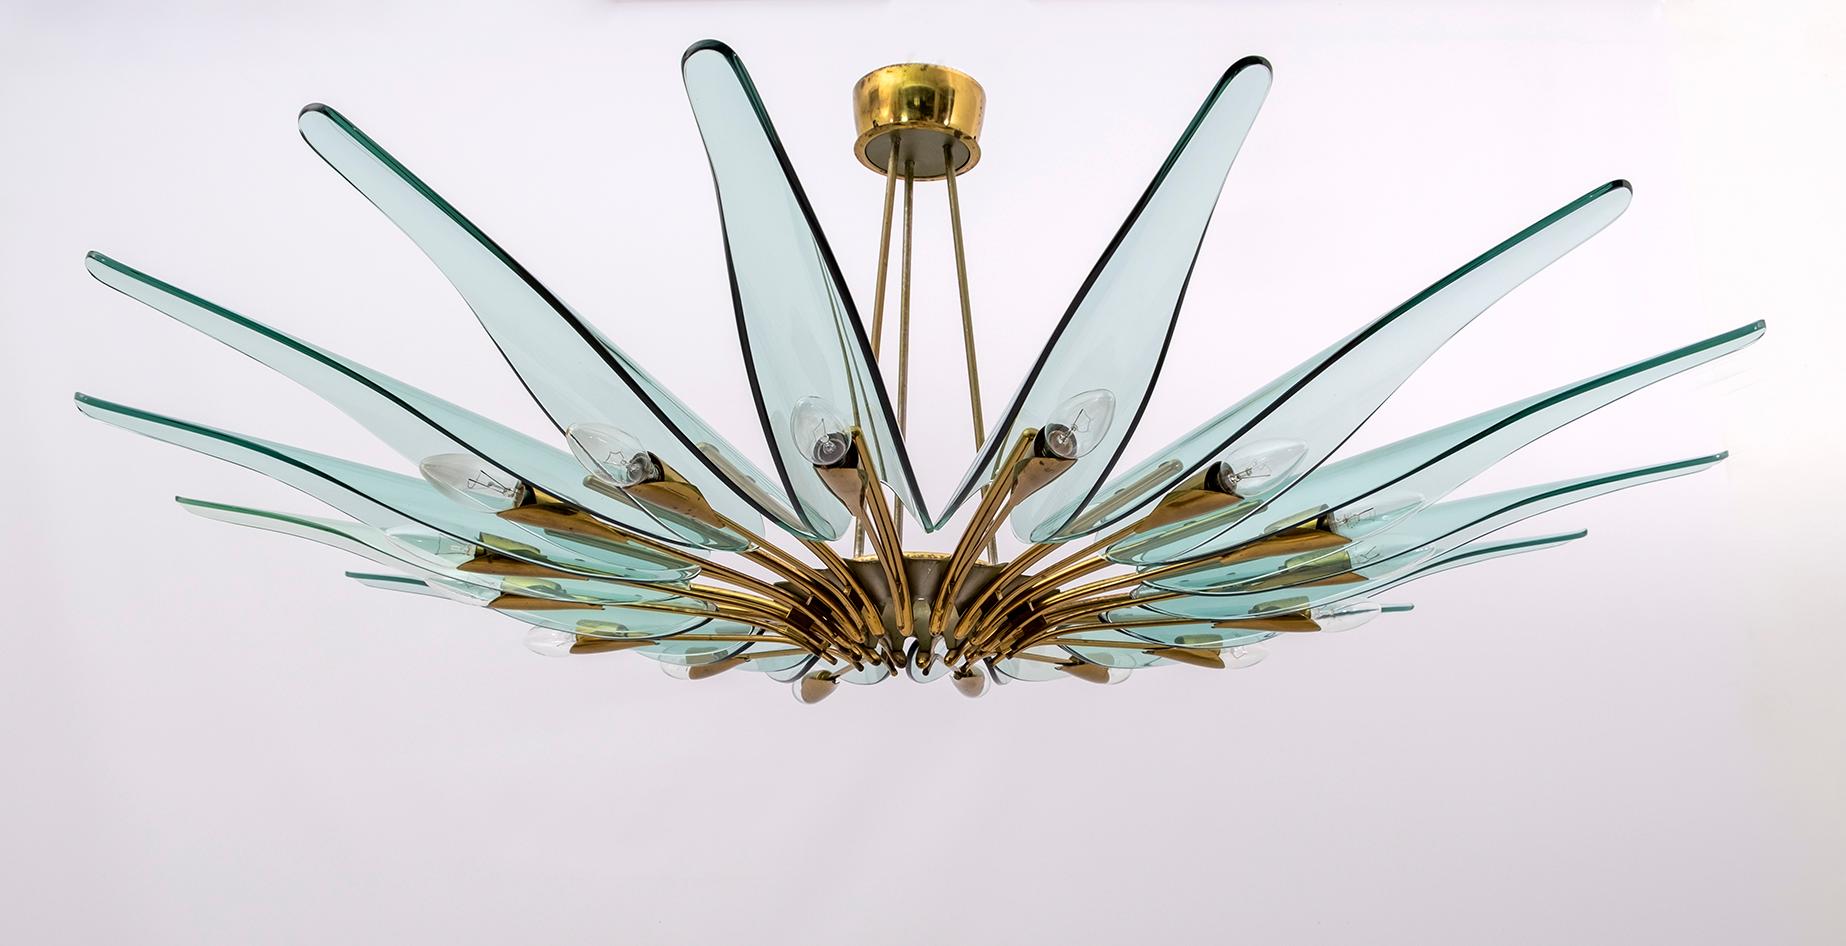 To consider is the Dahlia chandelier mod. 1563A with 16 lights by Max Igrand for Fontana Arte, Italy, circa 1950s. Cast brass and curved crystal. Excellent original condition of the time, not restored. The crystal has a shade of green. The brass has